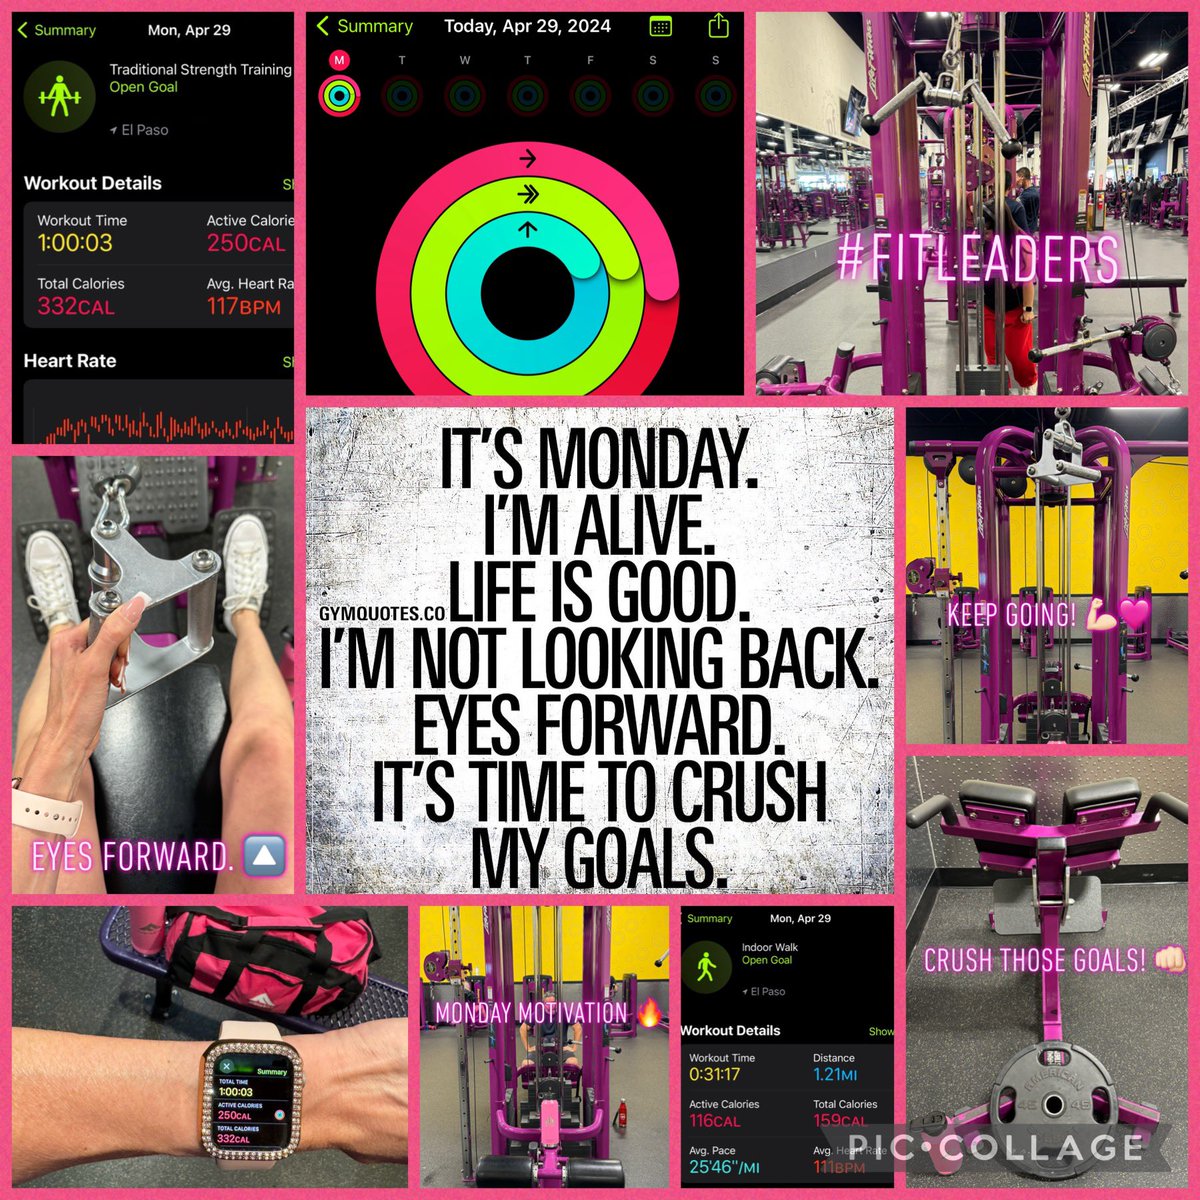 It’s Monday! I’m alive. Life is good. I’m not looking back. It’s time to crush those goals! 💯 Keep your eyes forward on your goals. It’s time to crush them! 💪🏻👊🏻🎯 #MondayMotivation #FitLeaders @zjgalvan @PrincipalRoRod @DiocelinaBelle @educategalore @LorenaRubio123 @vggarcia13